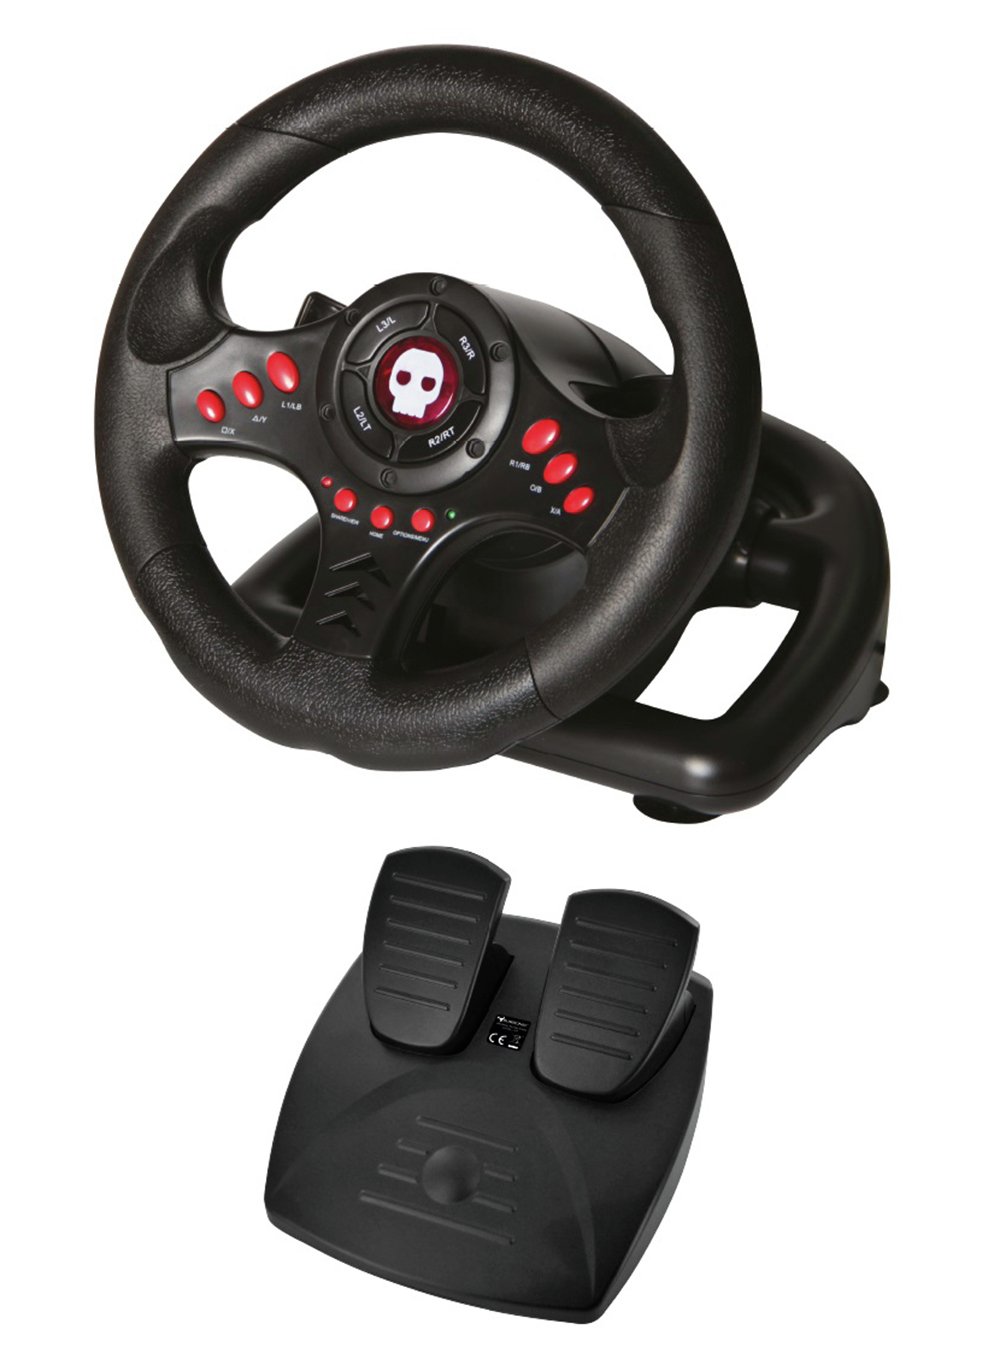 Numskull NS101 Steering Wheel & Pedals for PS4, Xbox, PC